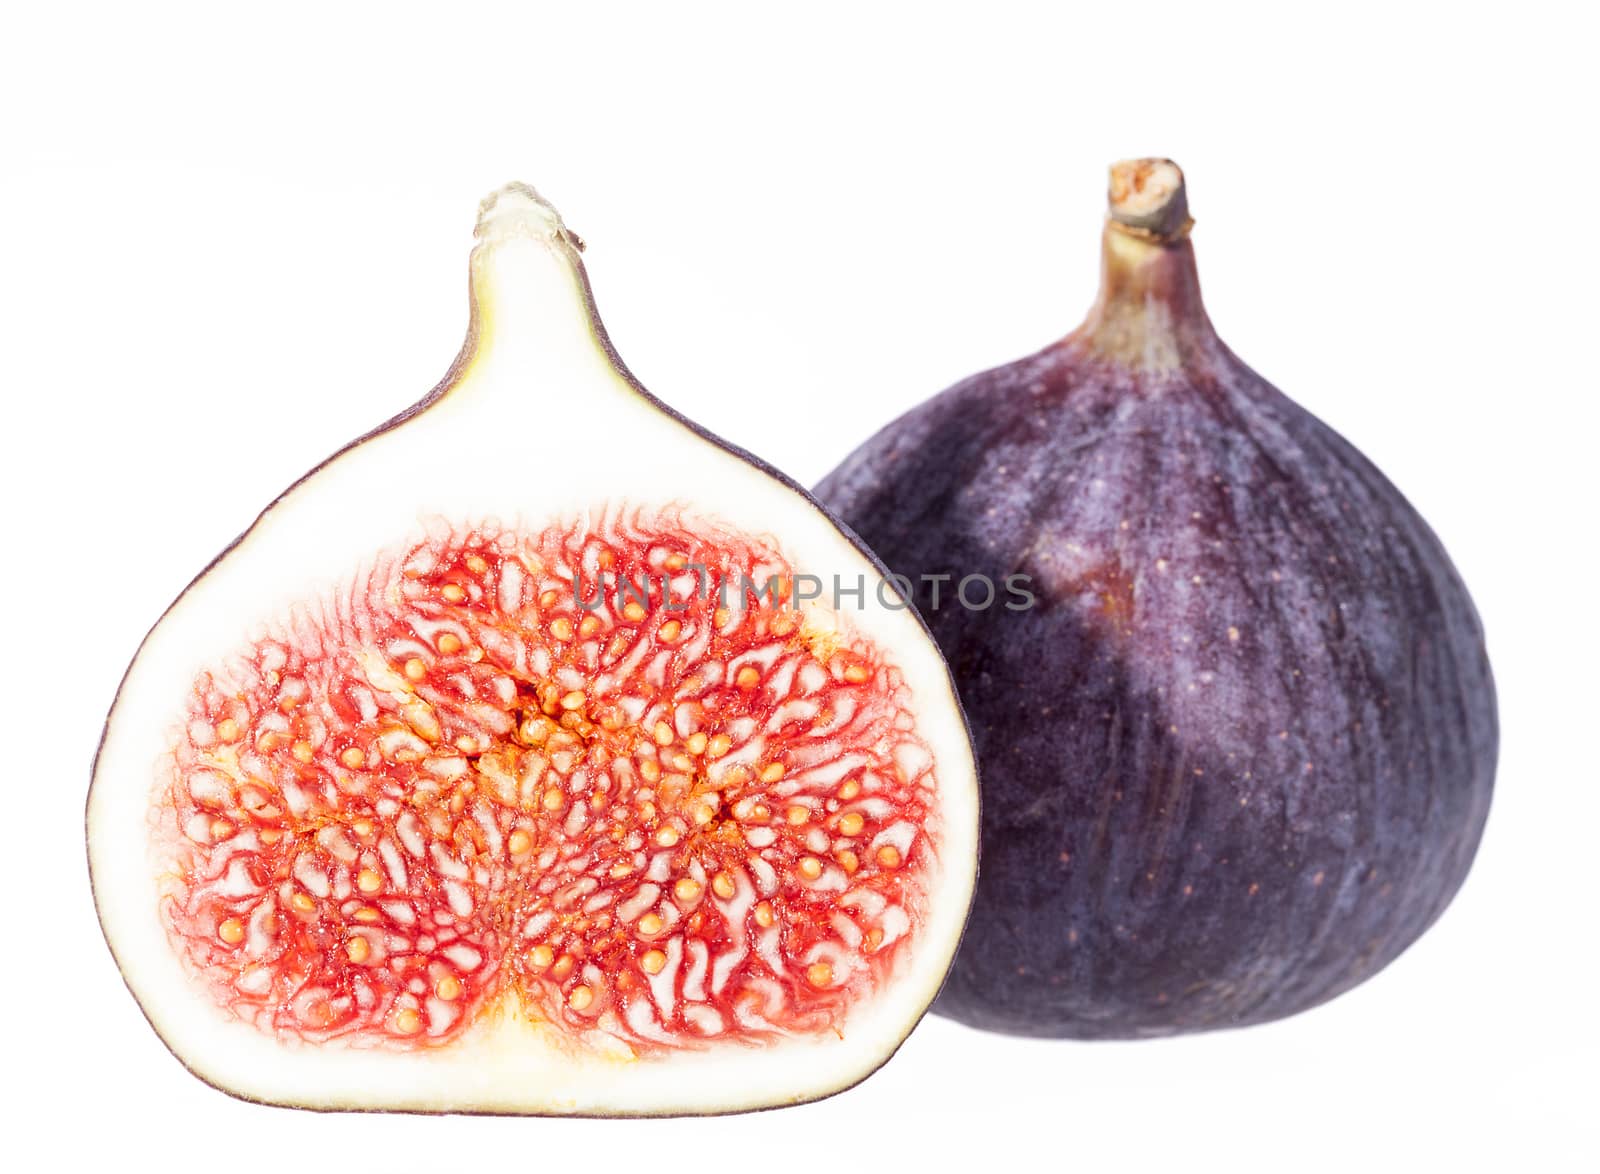 Fruits of fresh figs isolated on white background by mychadre77